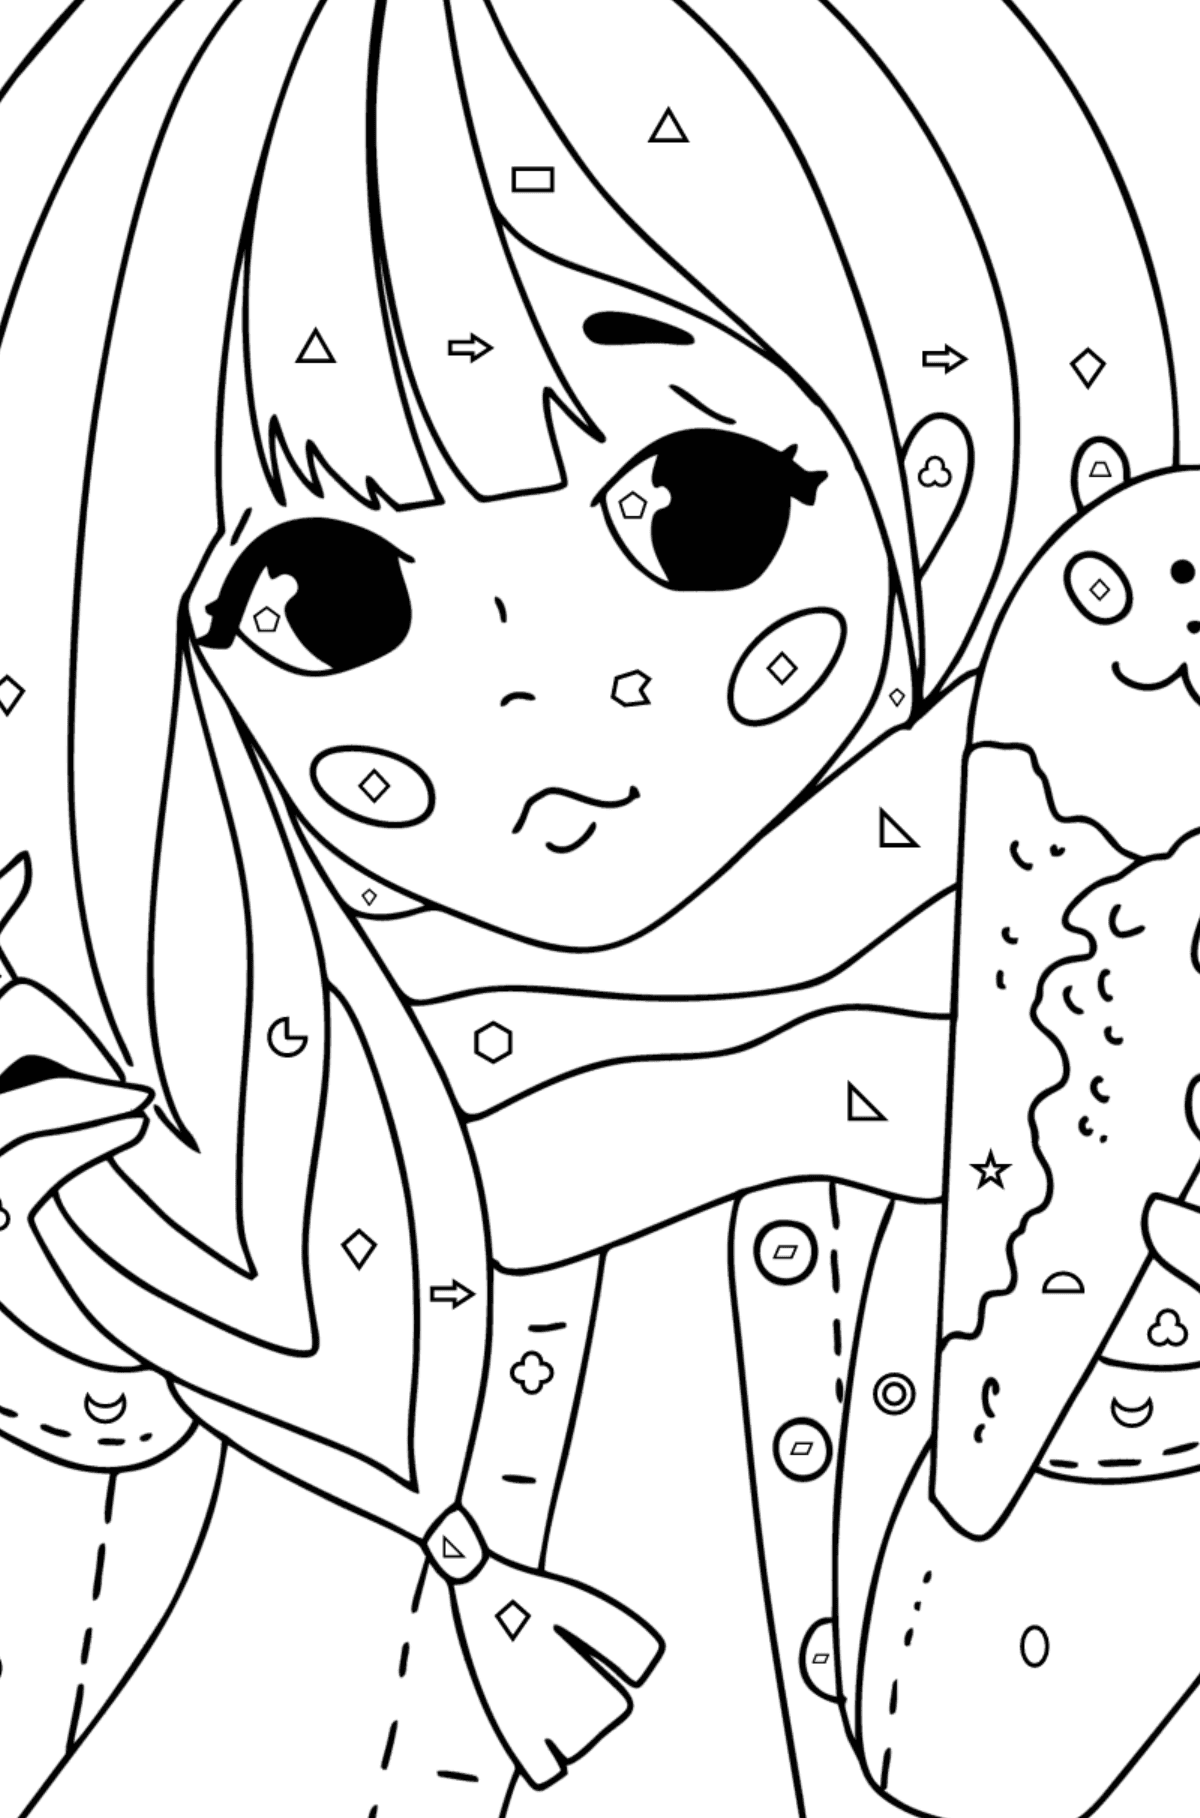 Pretty anime girl coloring page - Coloring by Geometric Shapes for Kids